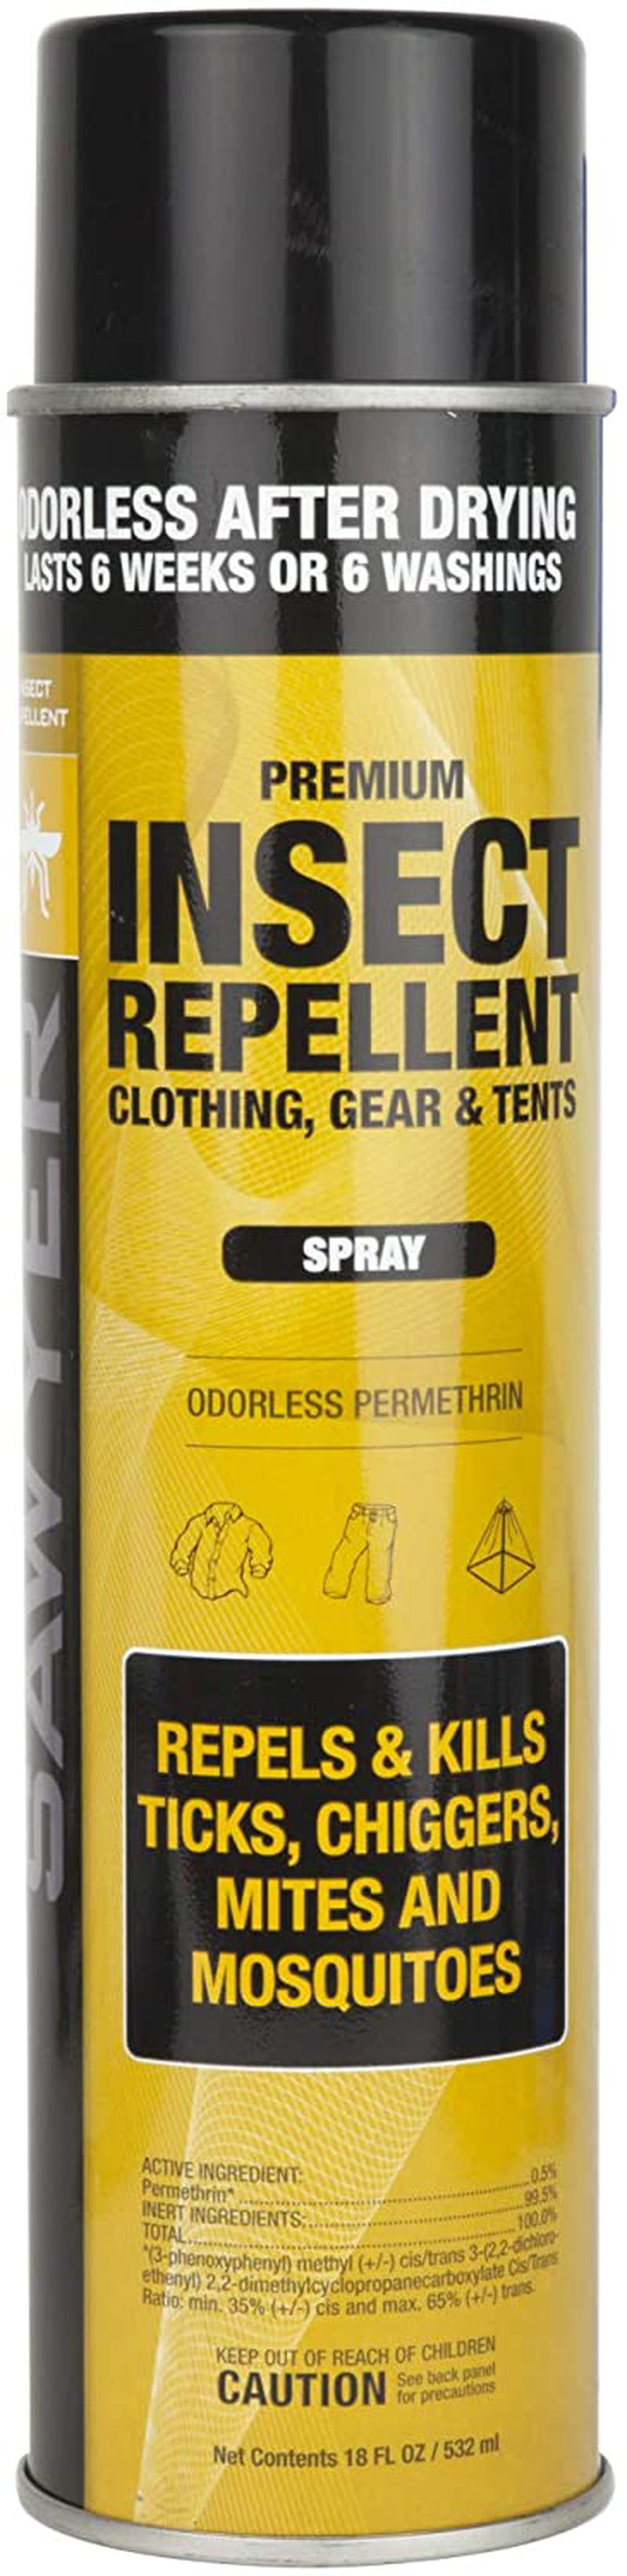 Sawyer Products Premium Permethrin Insect Repellent for Clothing, Gear & Tents